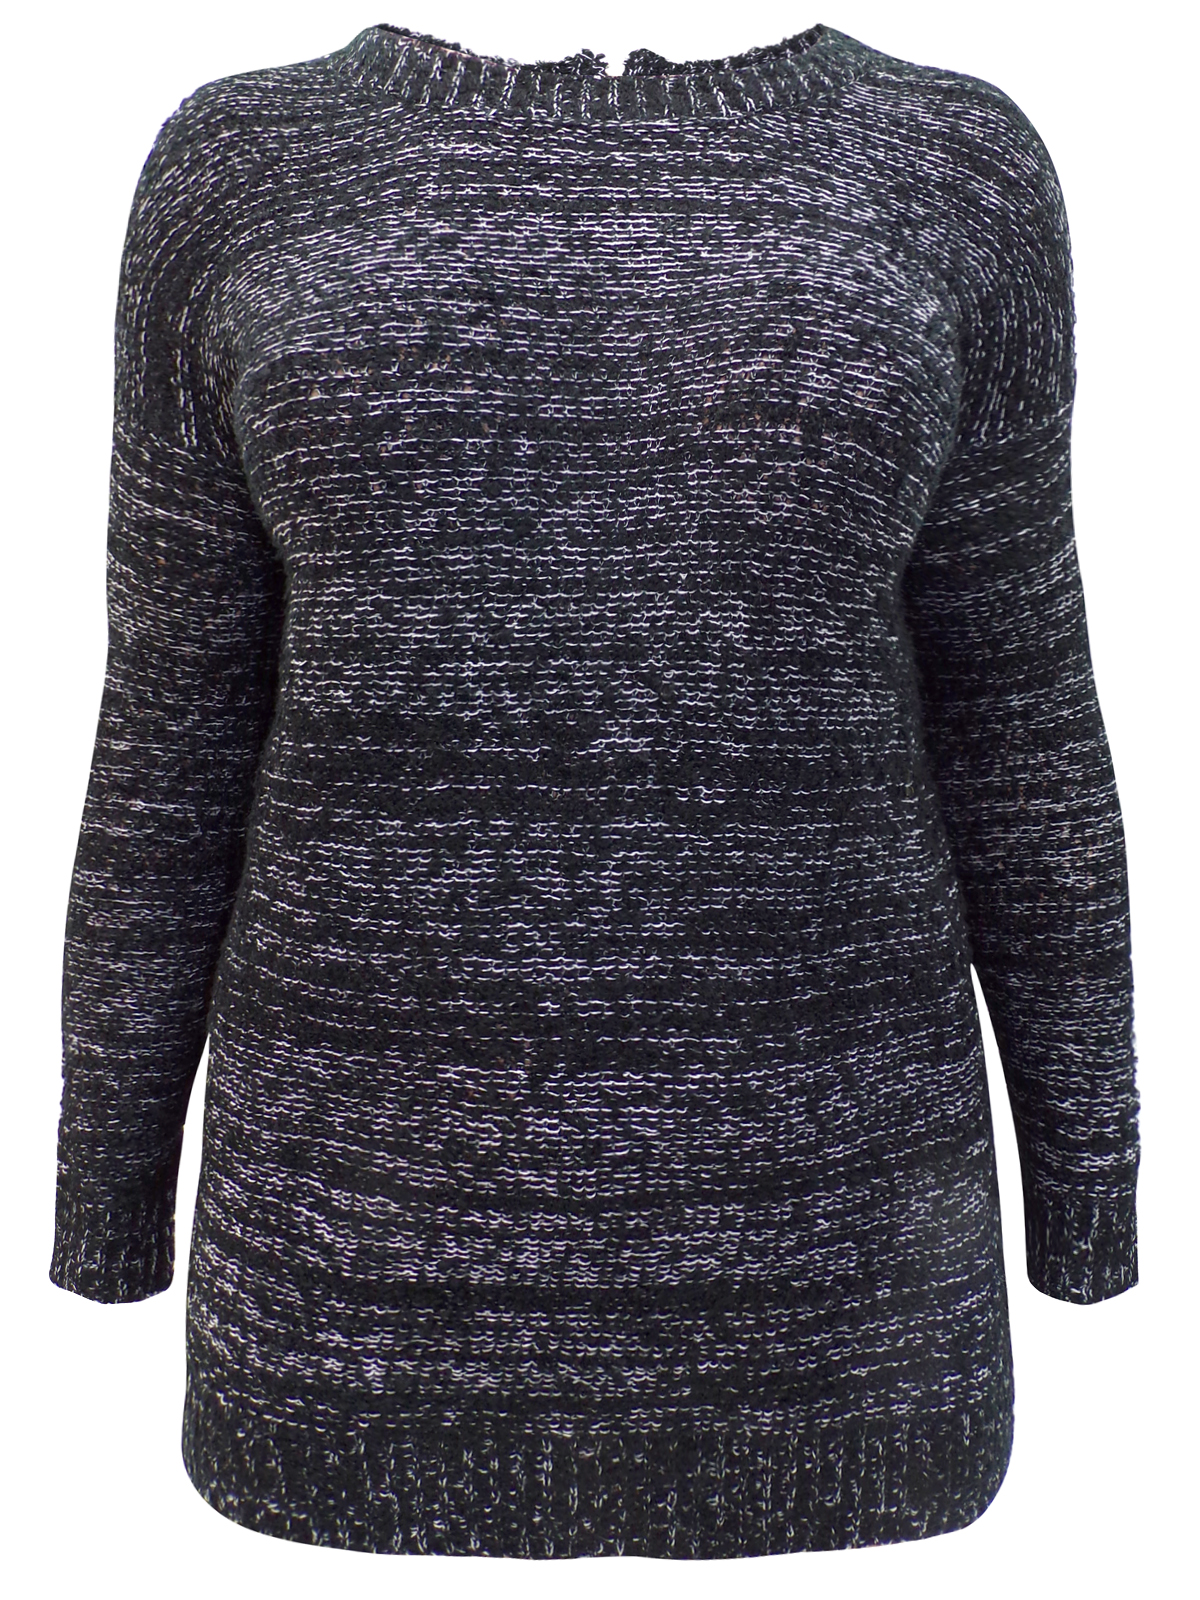 CURVE - - BLACK Assorted Ladies Knitted Jumpers - Plus Size 16 to 28/30